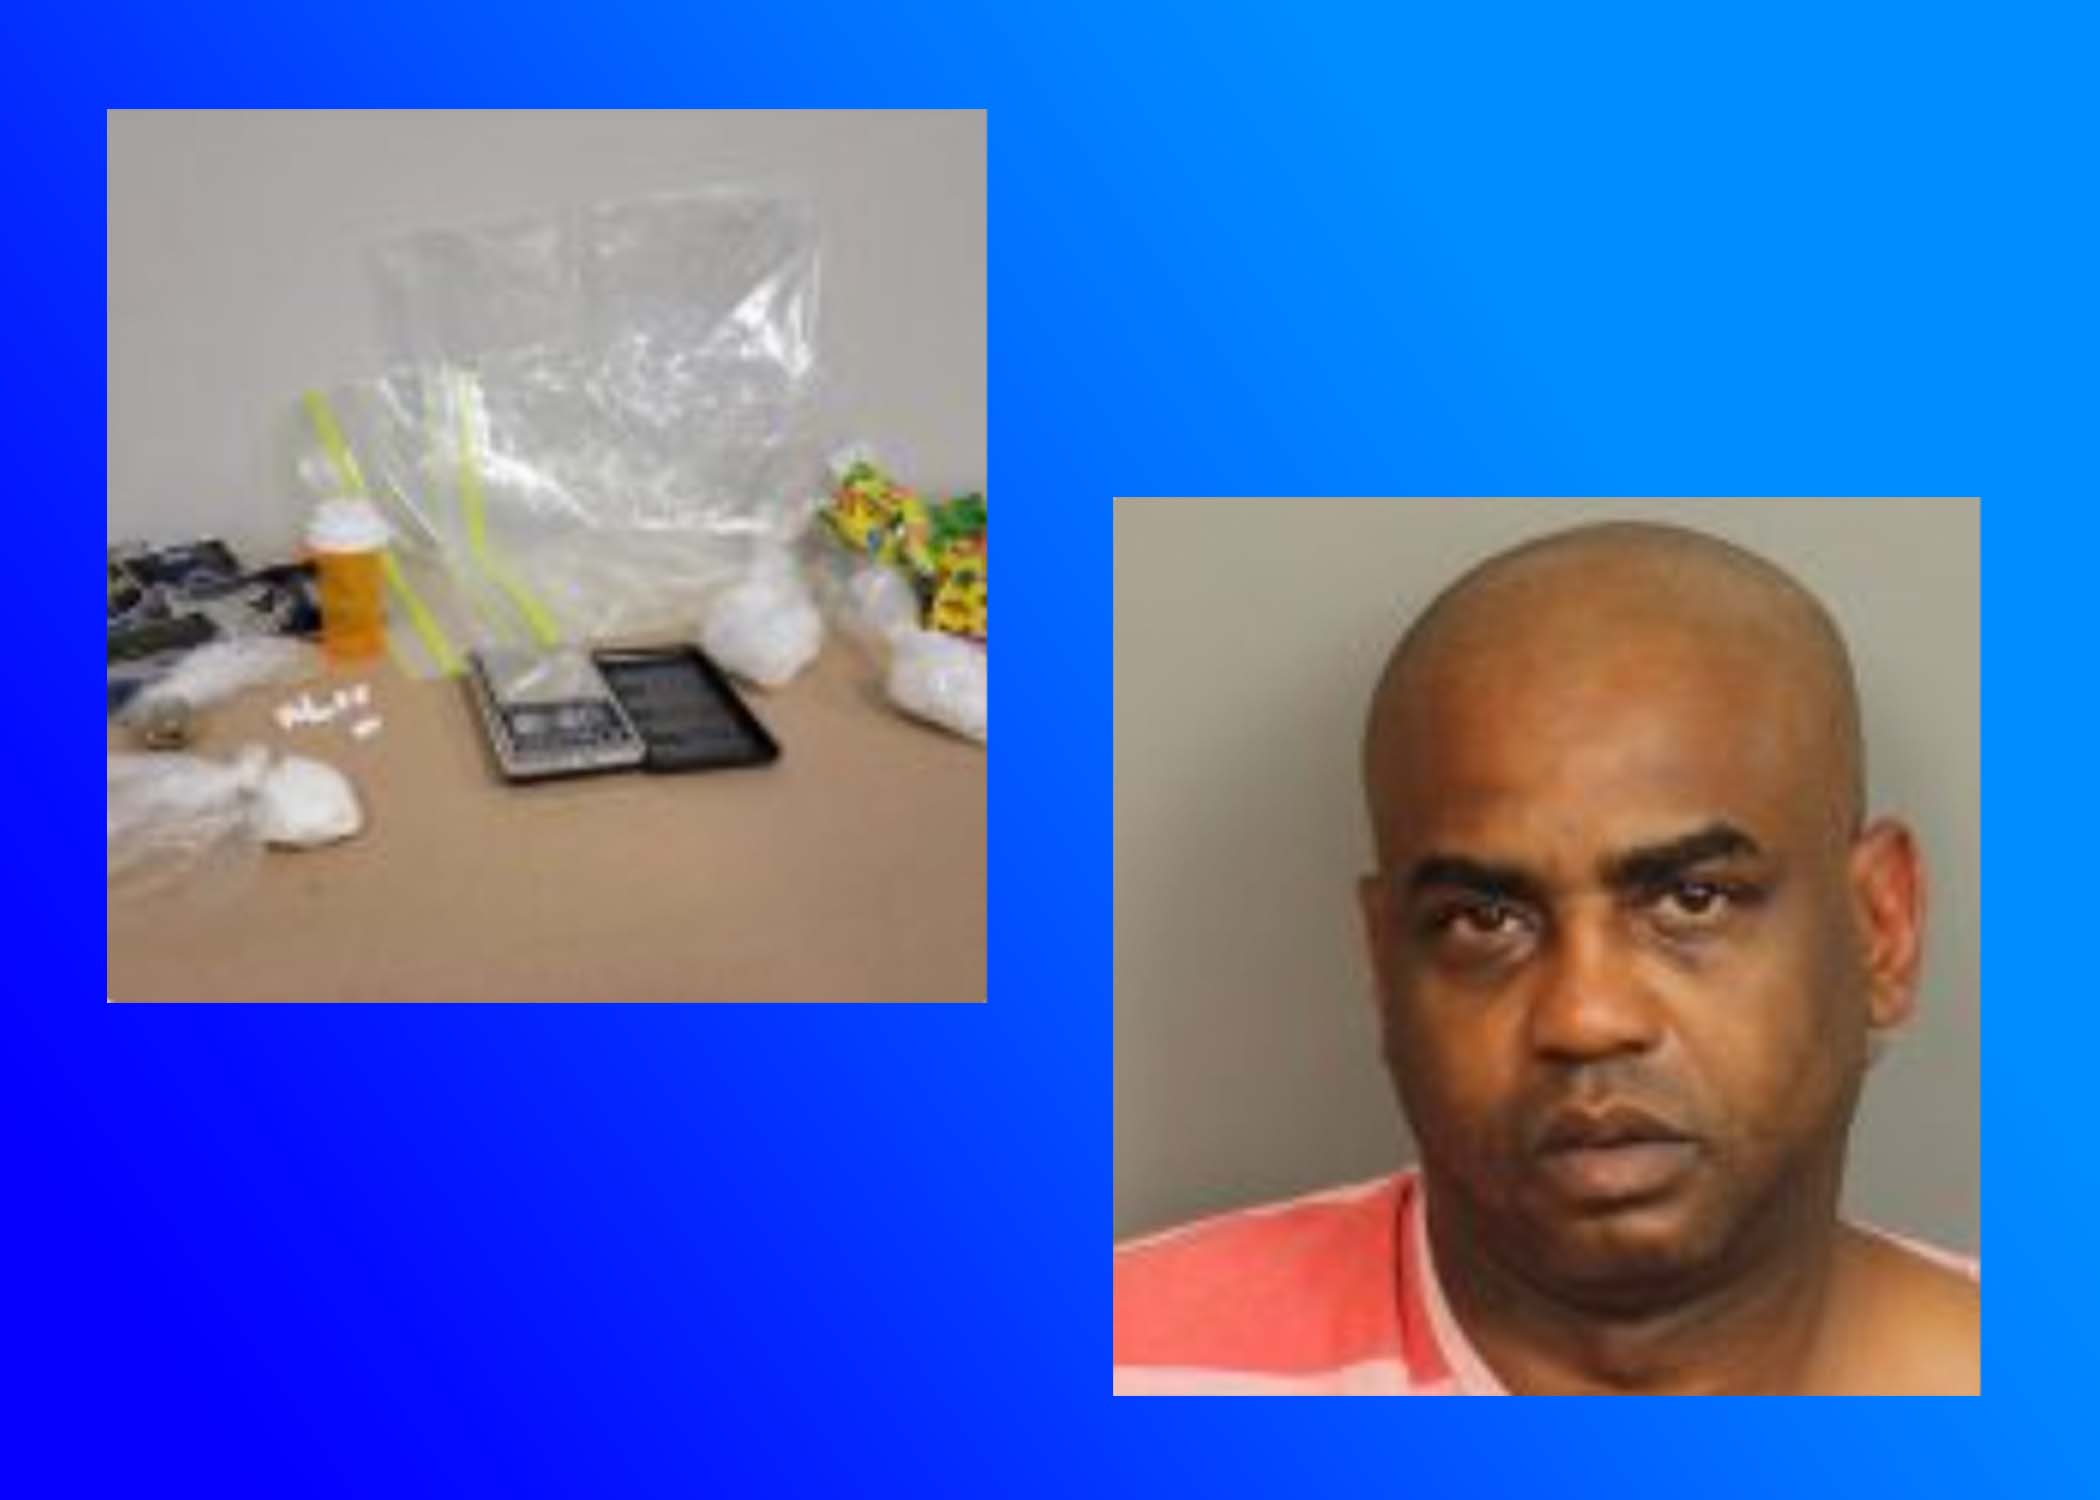 Ice and Cocaine seized in Center Point